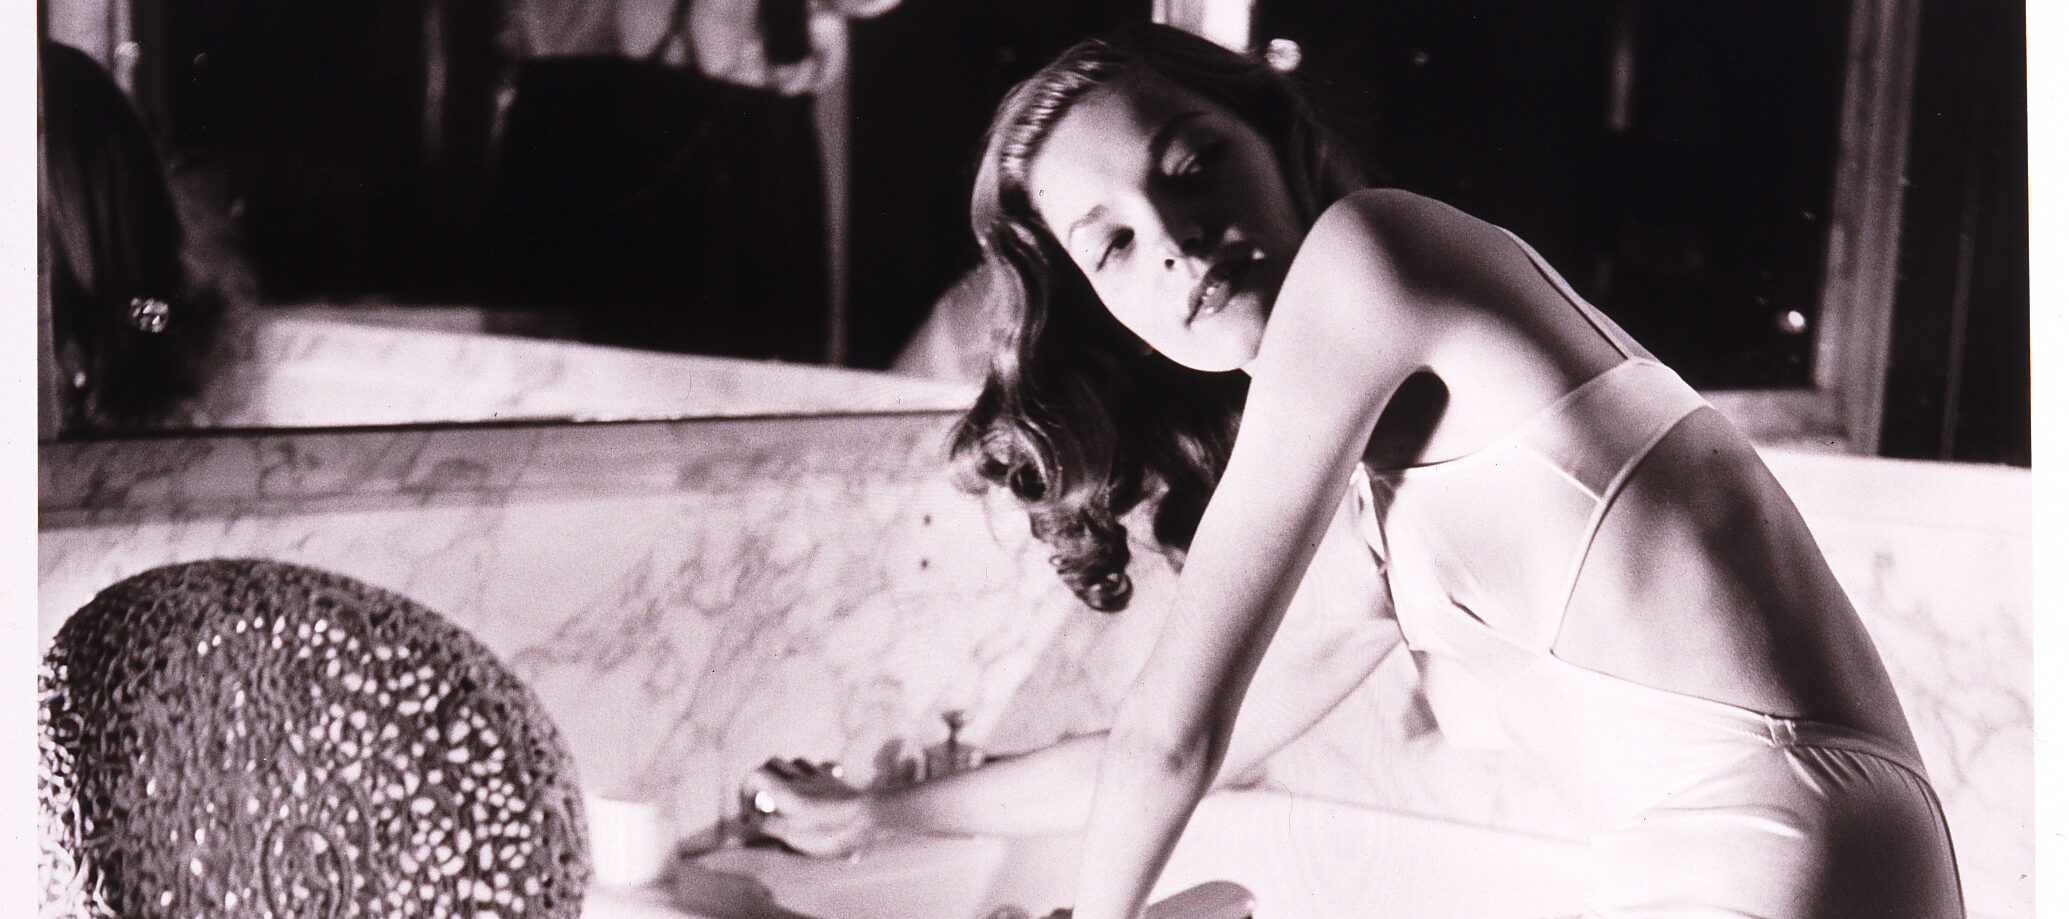 Louise Dahl-Wolfe, <i>Lauren Bacall in Helena Rubinstein's Bathroom</i>, 1943; Gelatin silver print, 14 x 11 in.; National Museum of Women in the Arts, Gift of Helen Cumming Ziegler; Photograph by Louise Dahl-Wolfe © 1989 Center for Creative Photography, Arizona Board of Regents